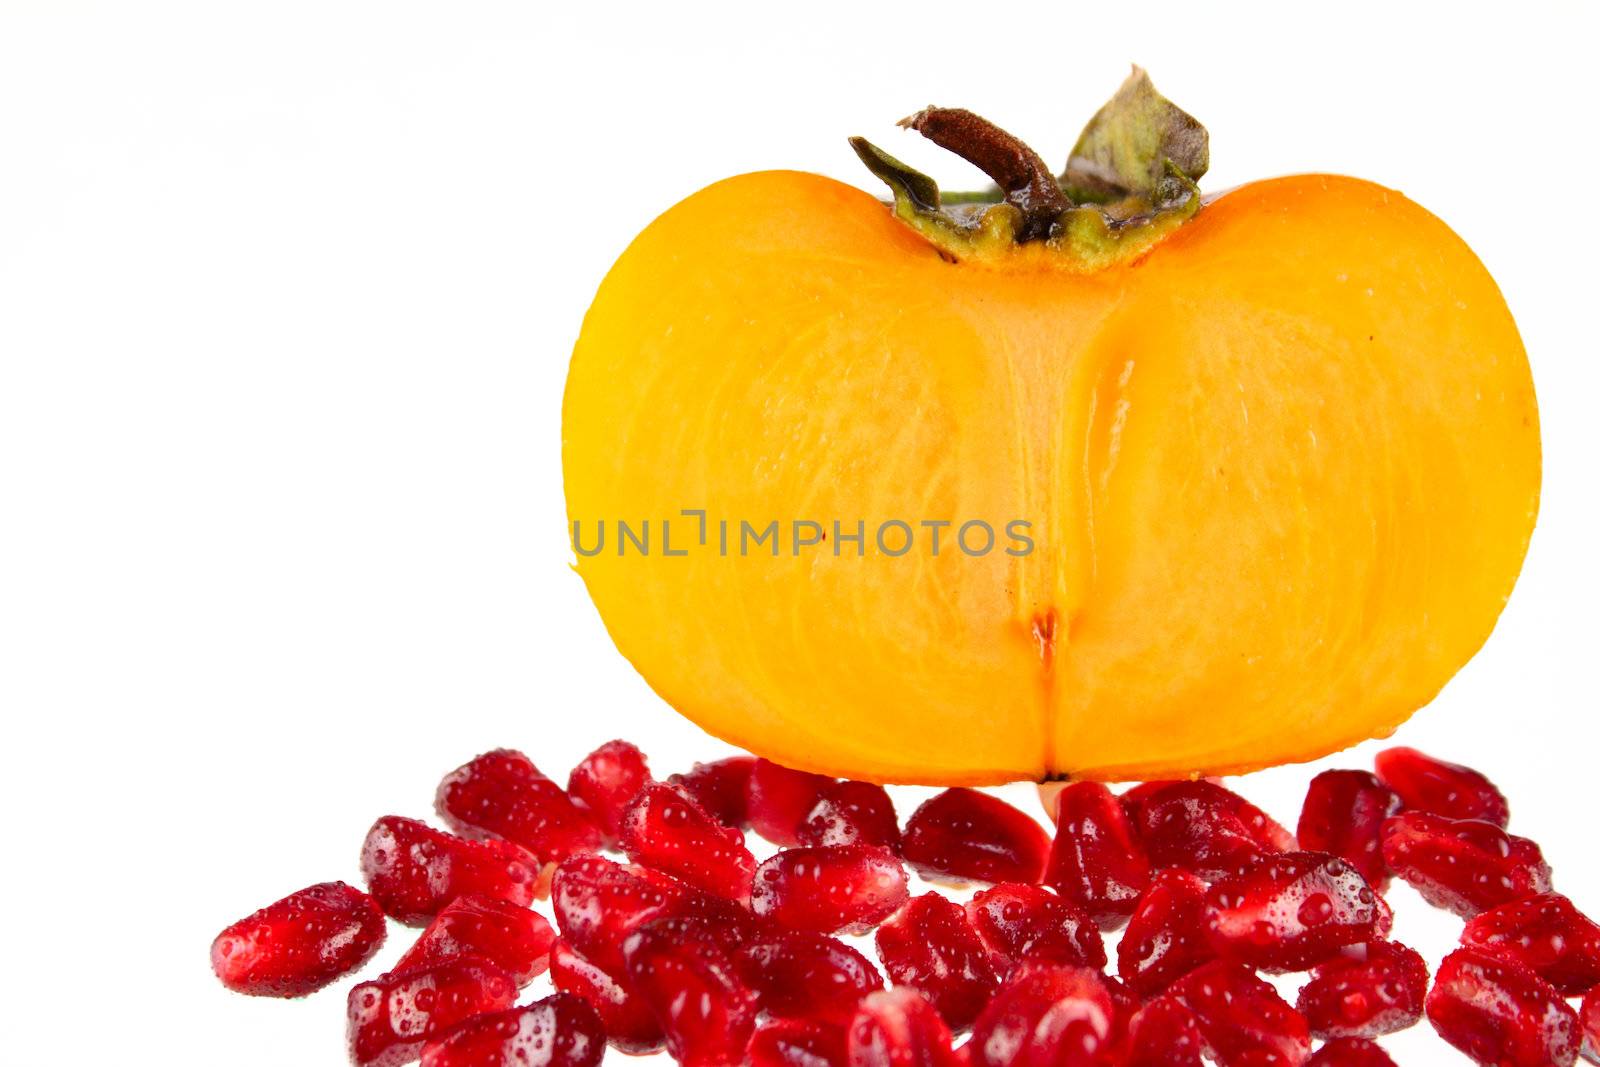 Grains pomegranate and a persimmon removed close up on a white background without isolation